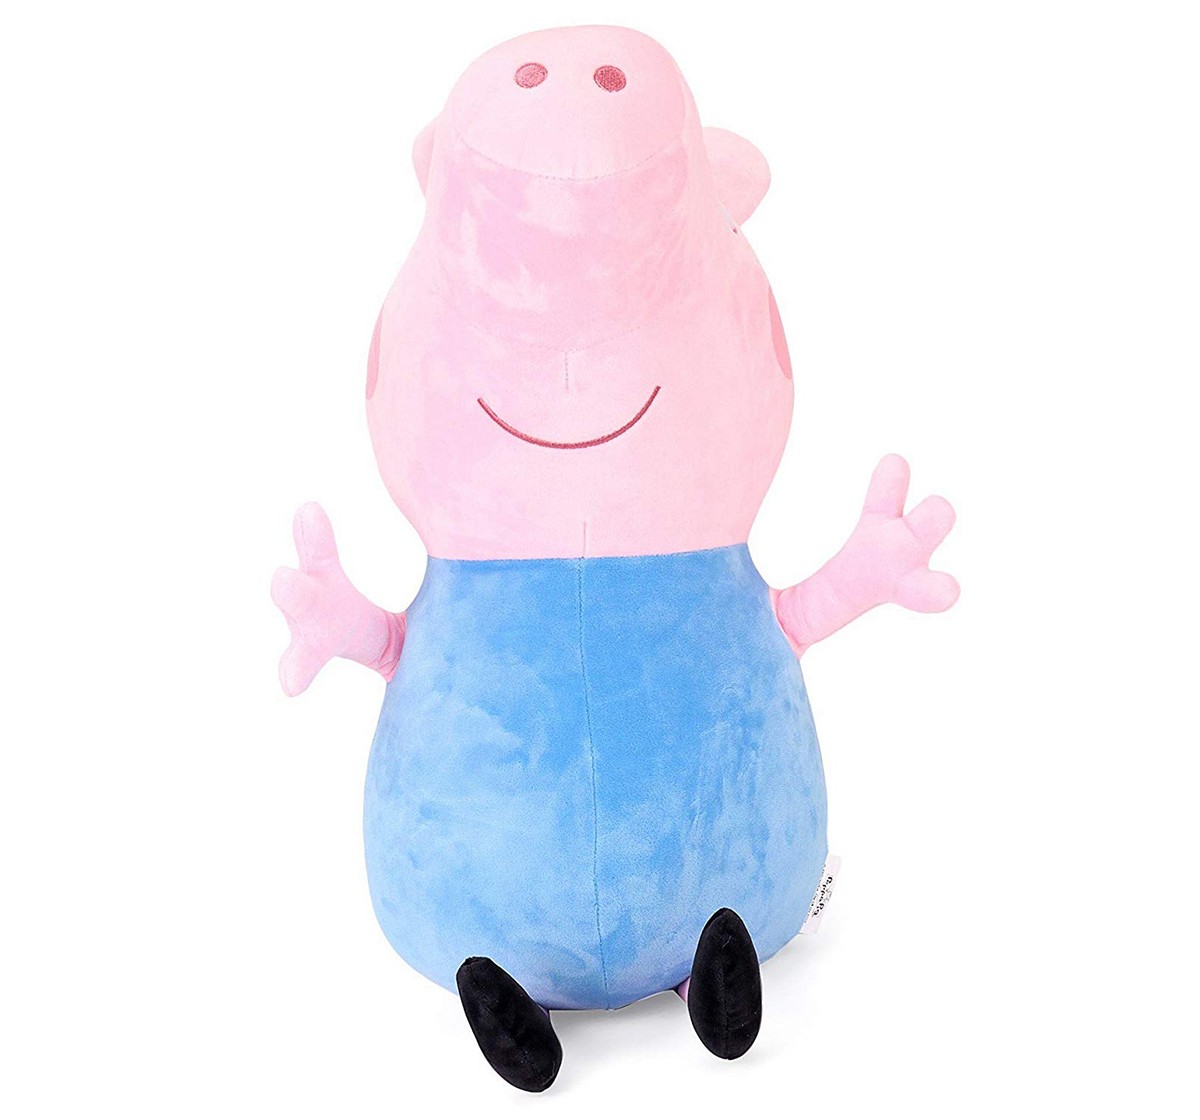 Peppa George Pig  Multi Color 46 Cm Soft Toy for Kids age 0M+ (Blue)